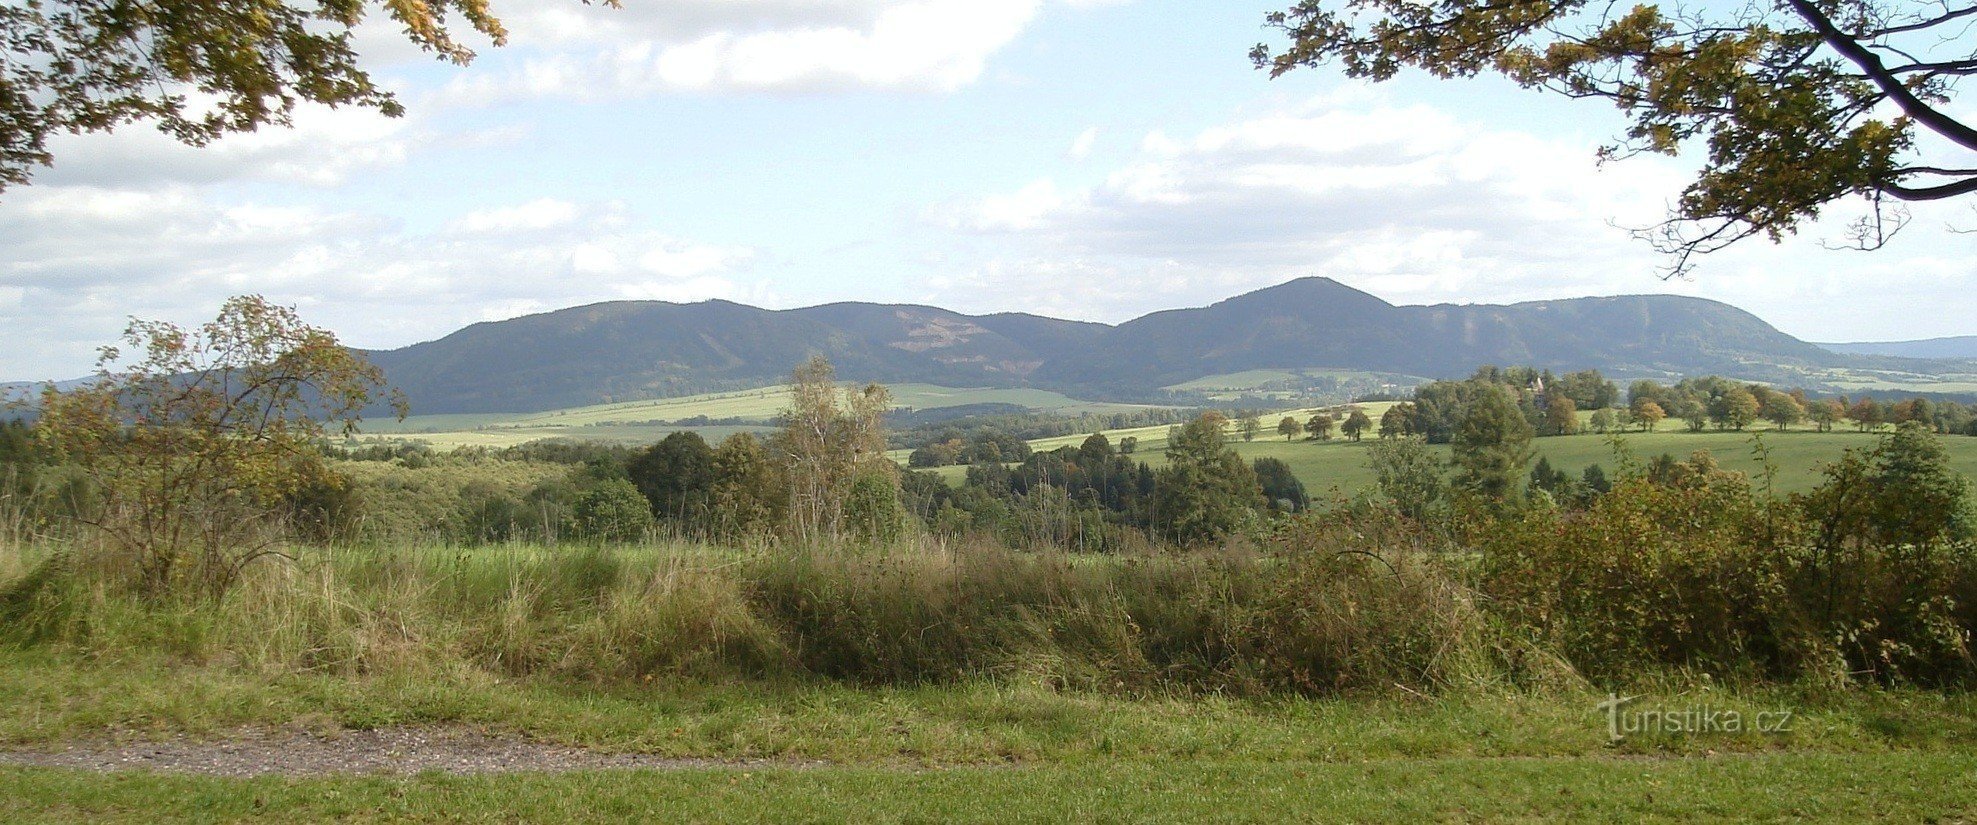 Panorama of the Crow Mountains